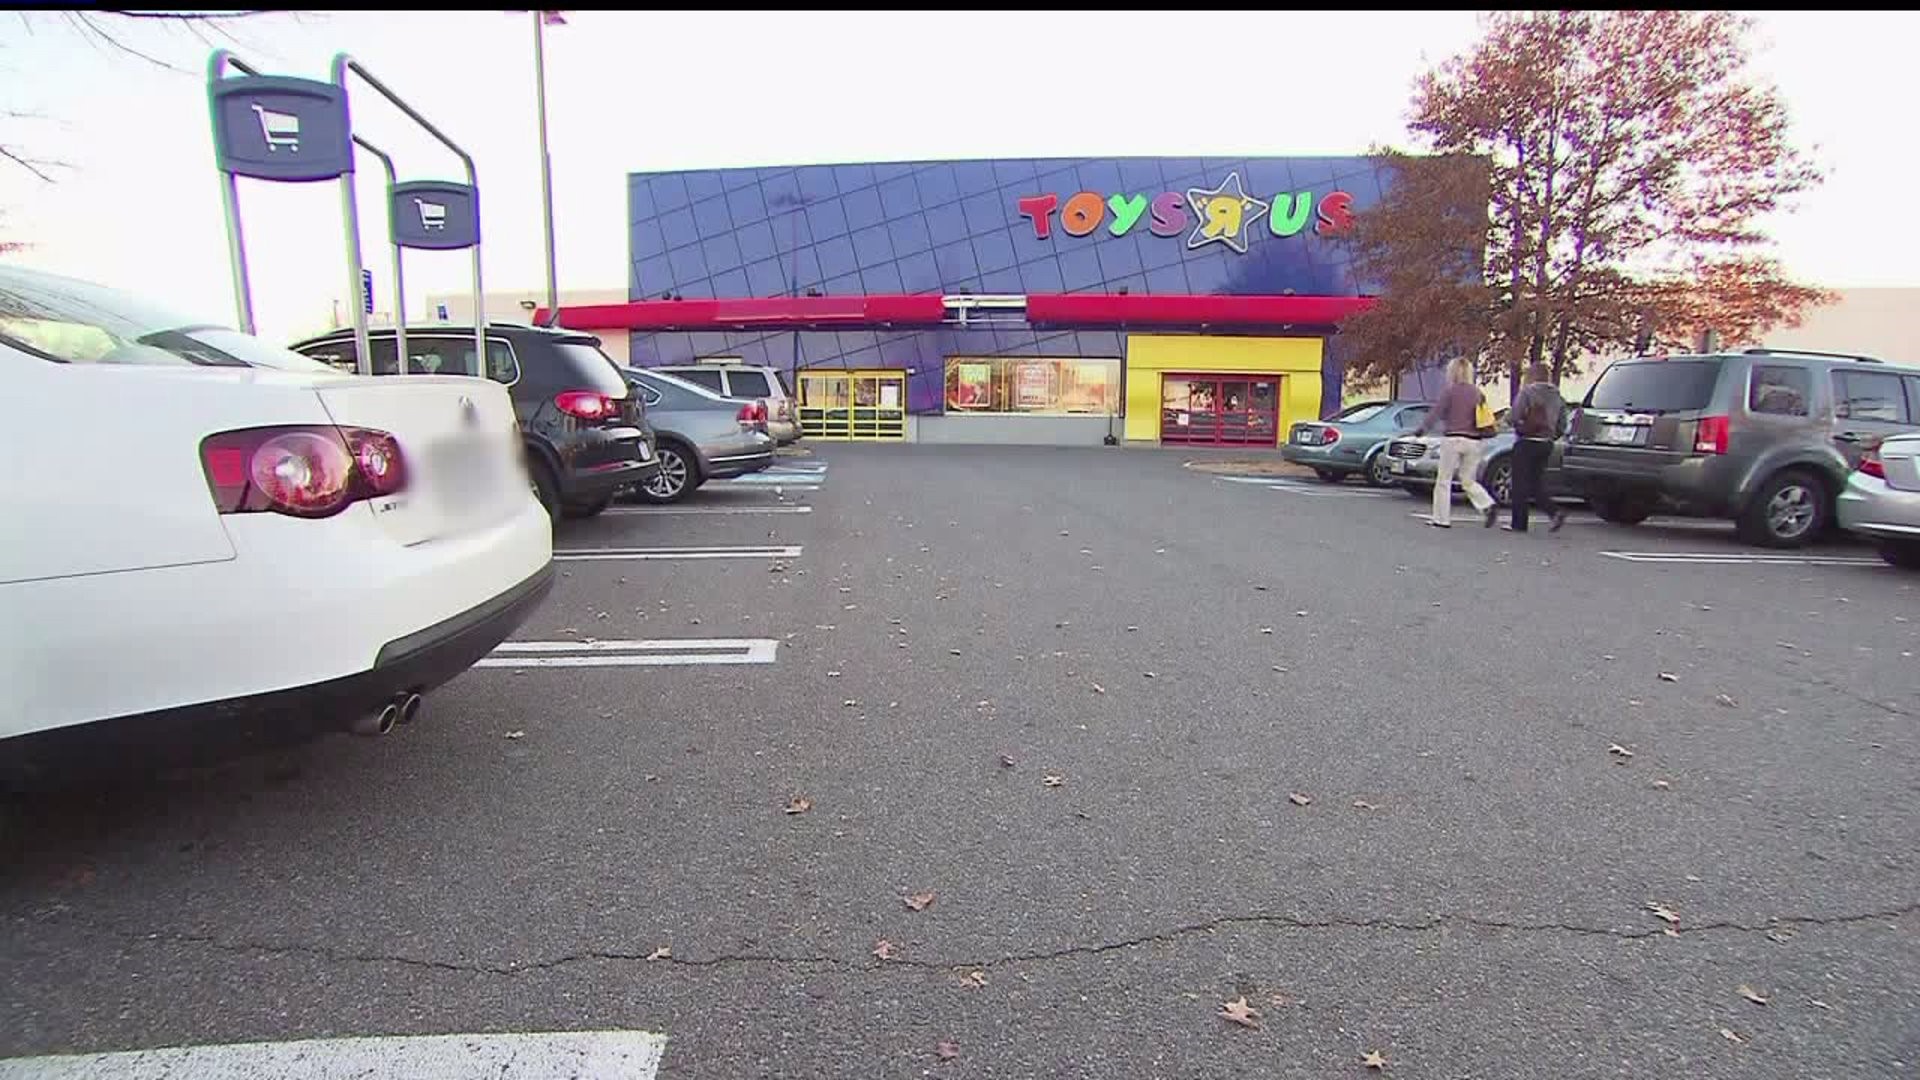 FOX43 Finds Out: Do toy stores have a future?